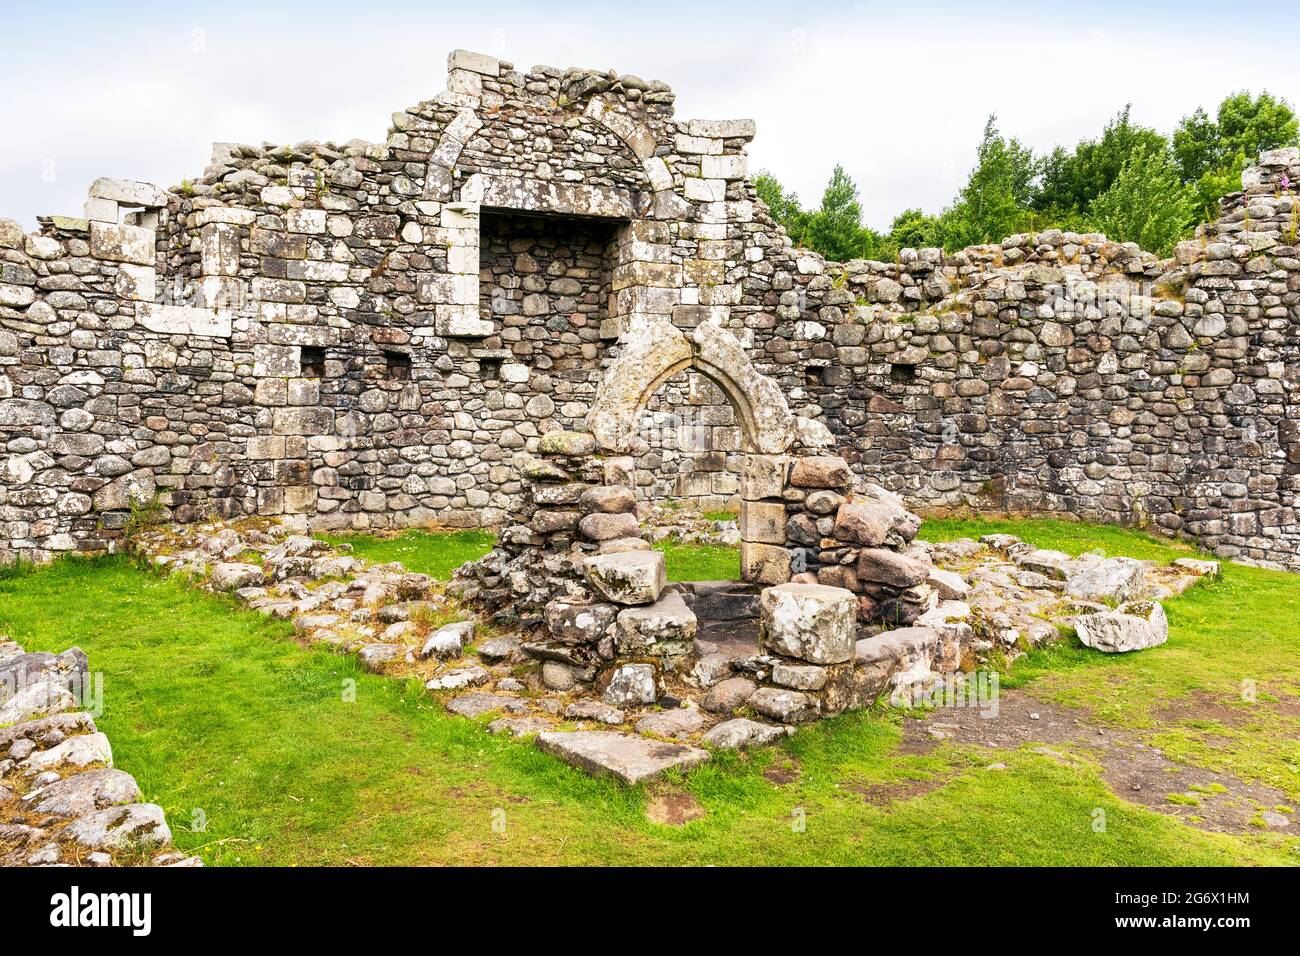 Interior of Loch Doon Castle. The castle is maintained by Historic Scotland. Built in the 13th century on an island in Loch Doon by Bruce, Earl of Car Stock Photo